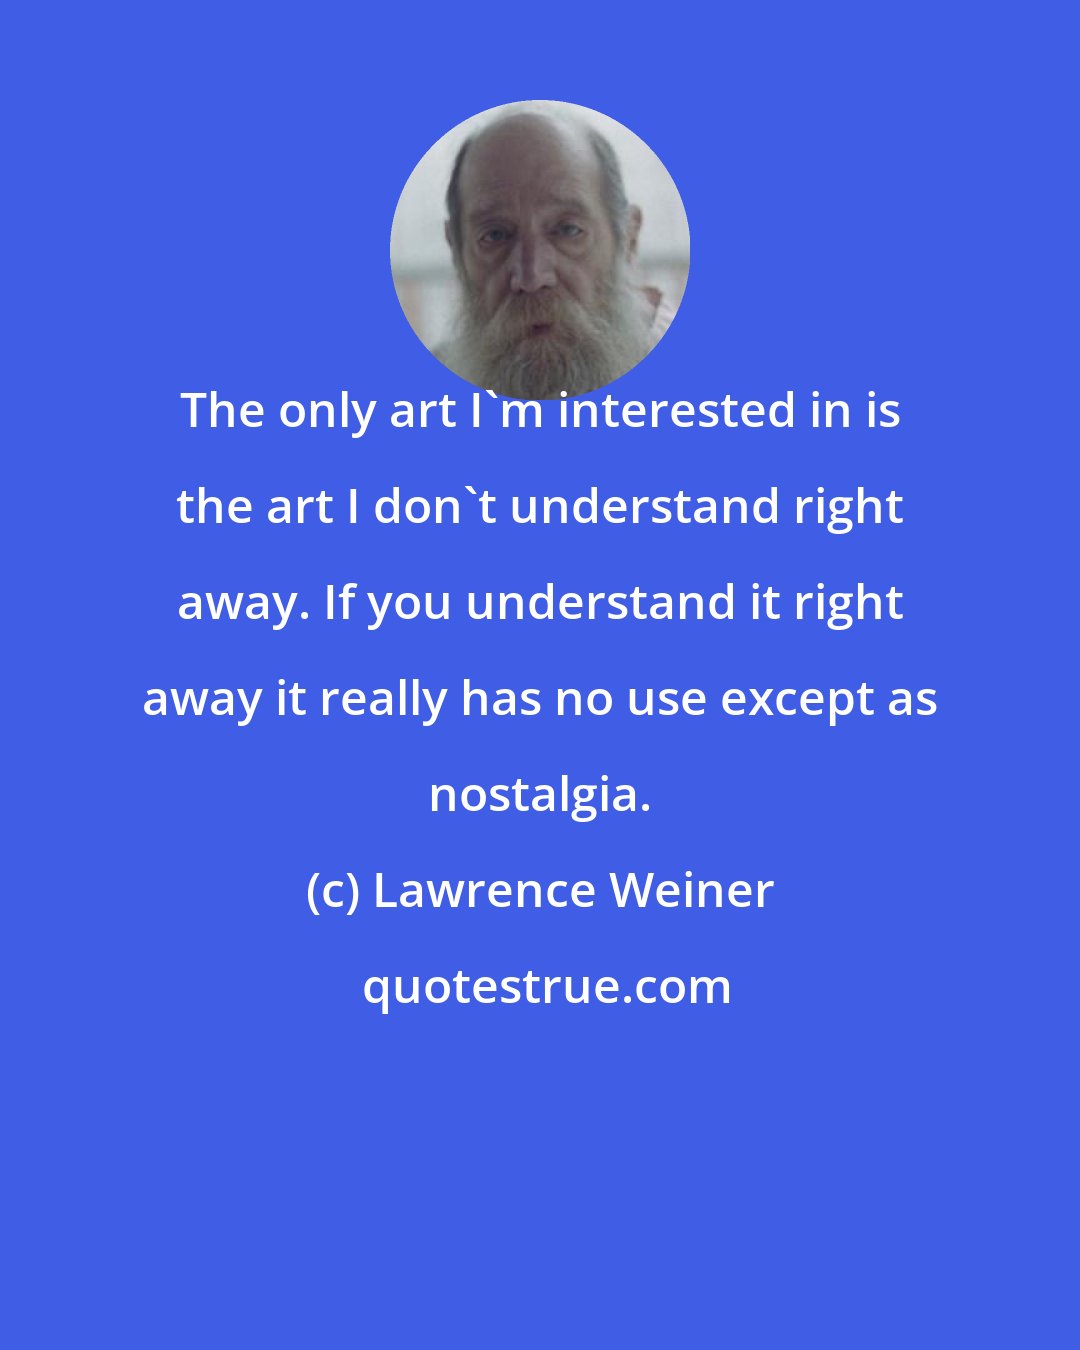 Lawrence Weiner: The only art I'm interested in is the art I don't understand right away. If you understand it right away it really has no use except as nostalgia.